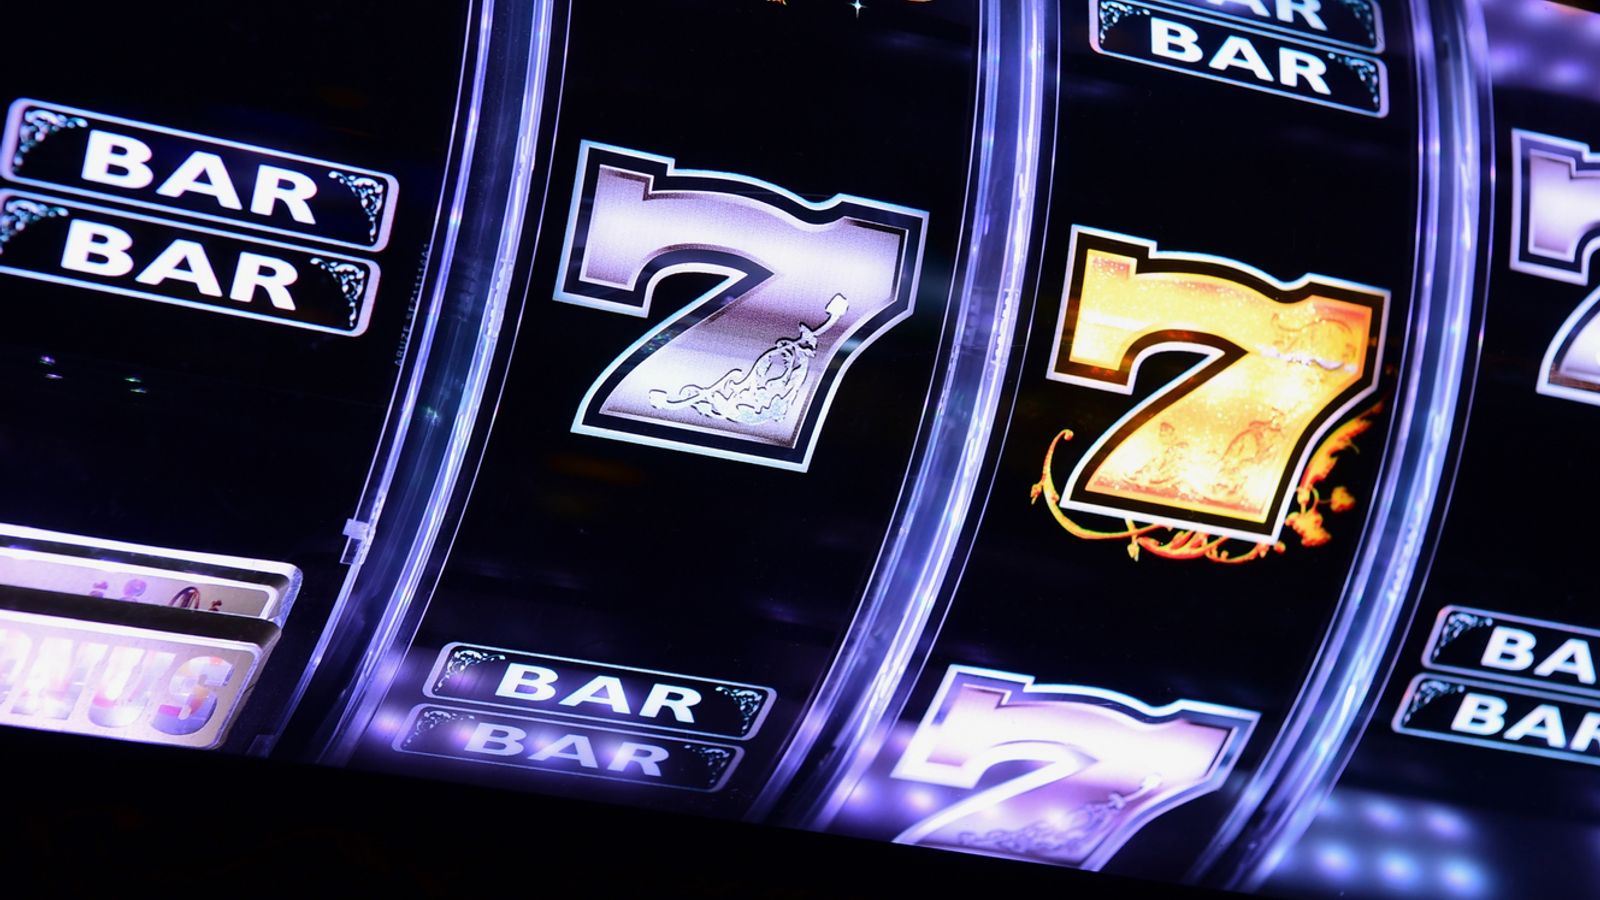 How gambling operators may be targeted further after William Hill's £19.2m fine